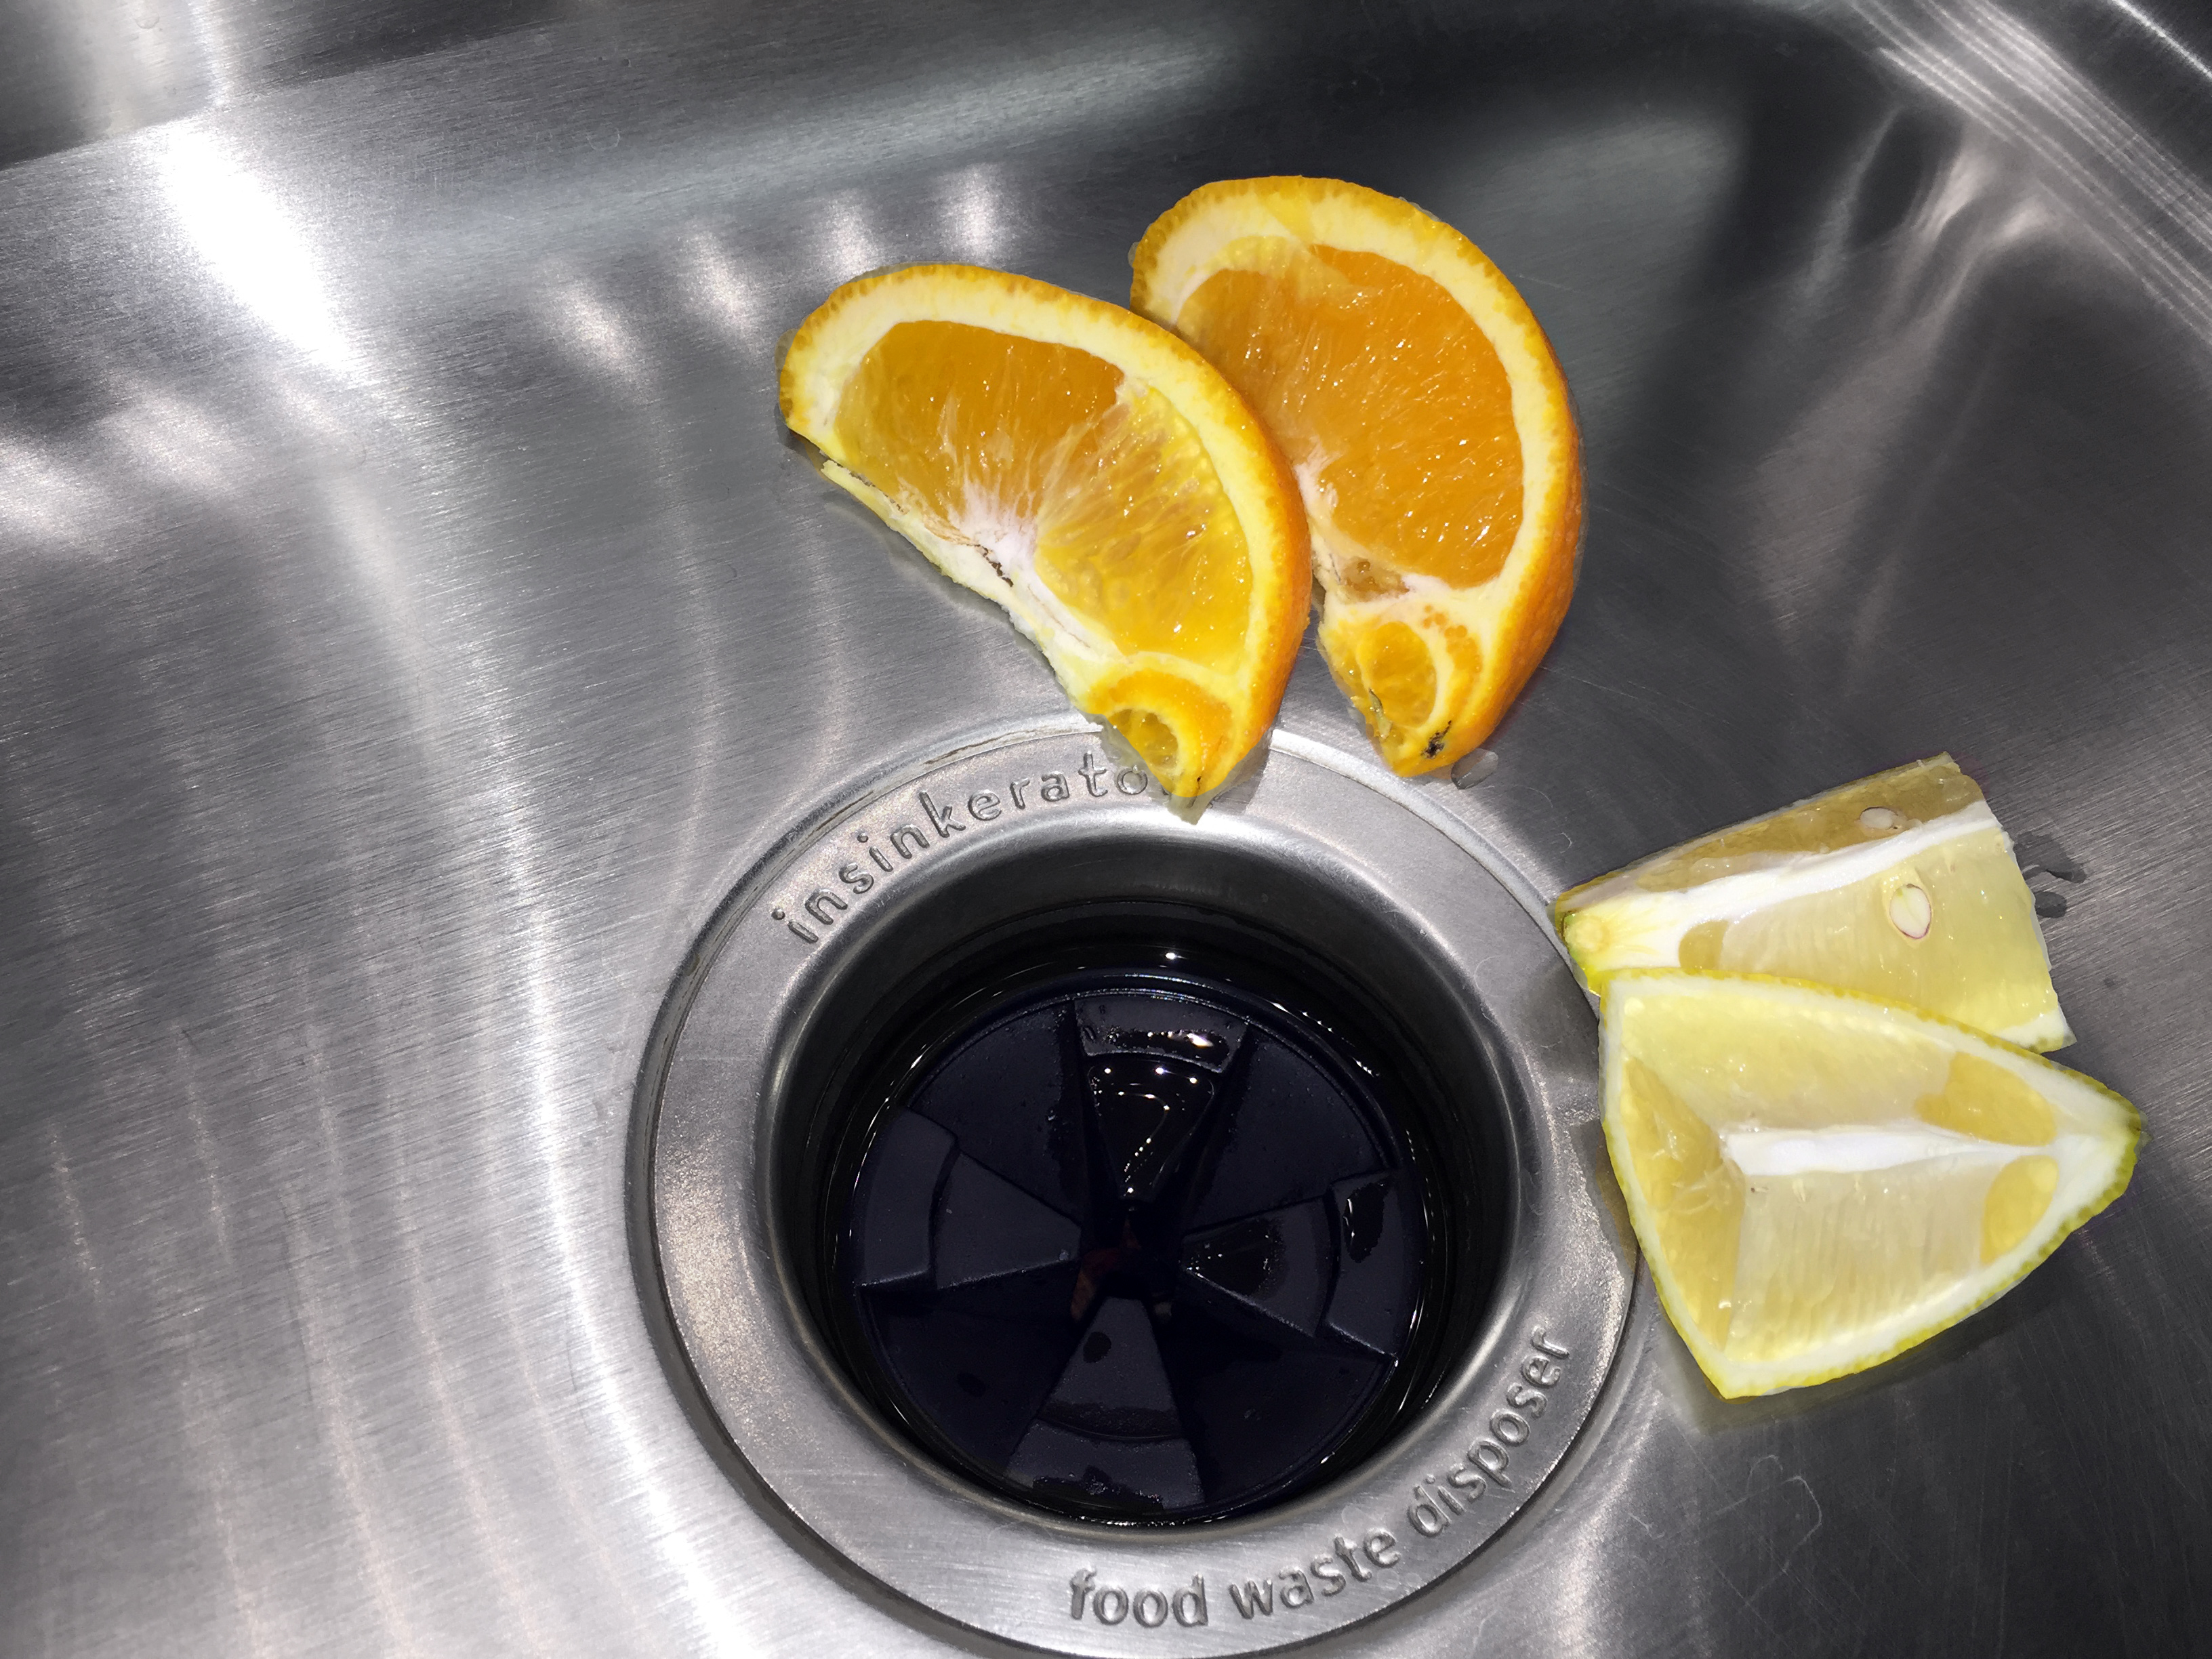 How Do You Clean a Garbage Disposal